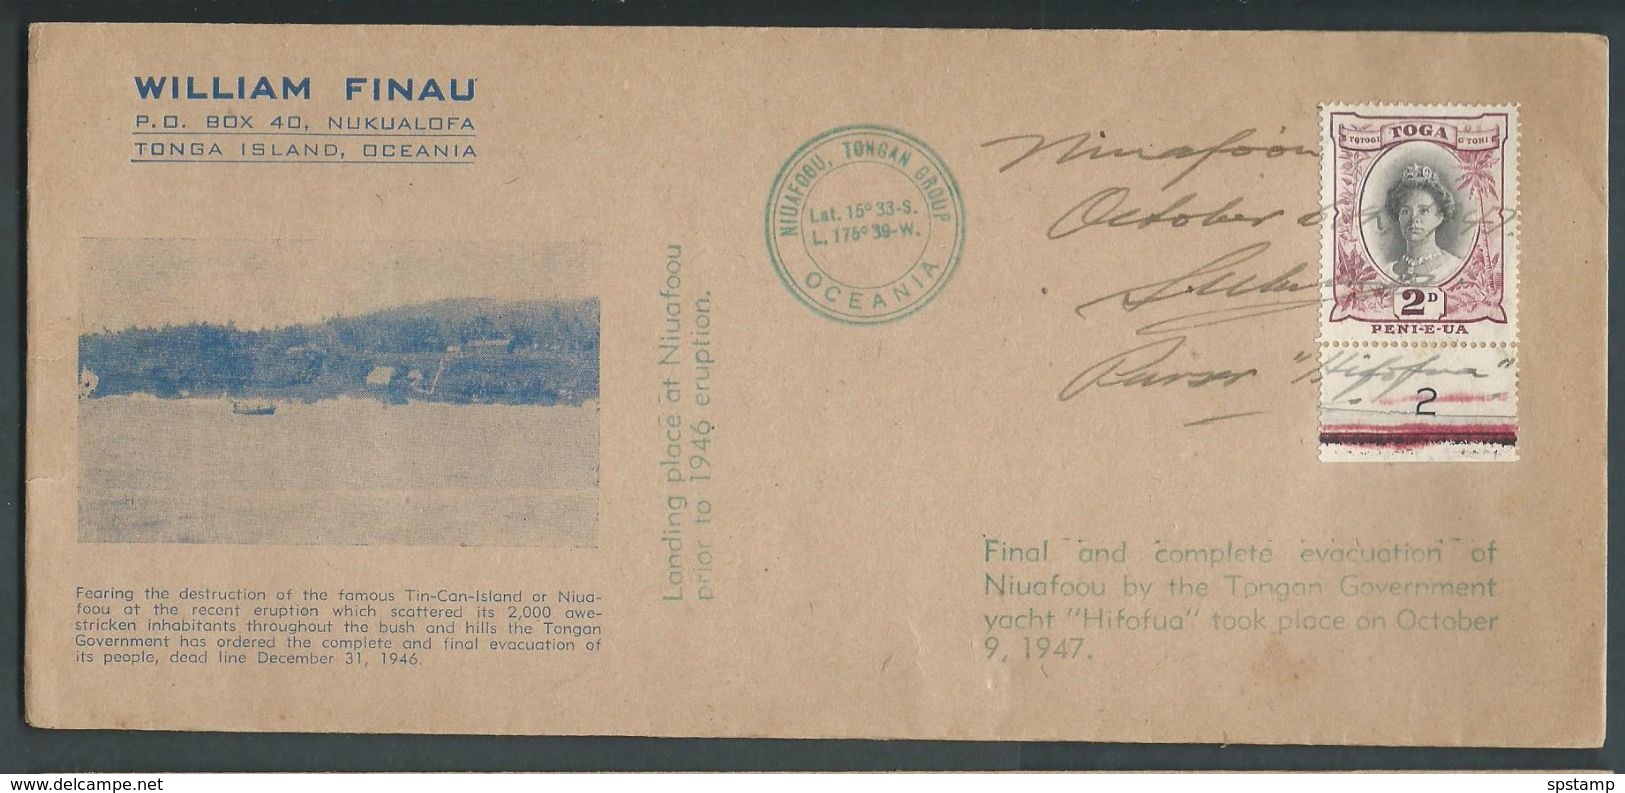 Tonga 1947 Niuafo'ou Evacuation Cover With 2d Queen Salote Plate 2 Single Tied By Manuscript Cancel - Tonga (...-1970)